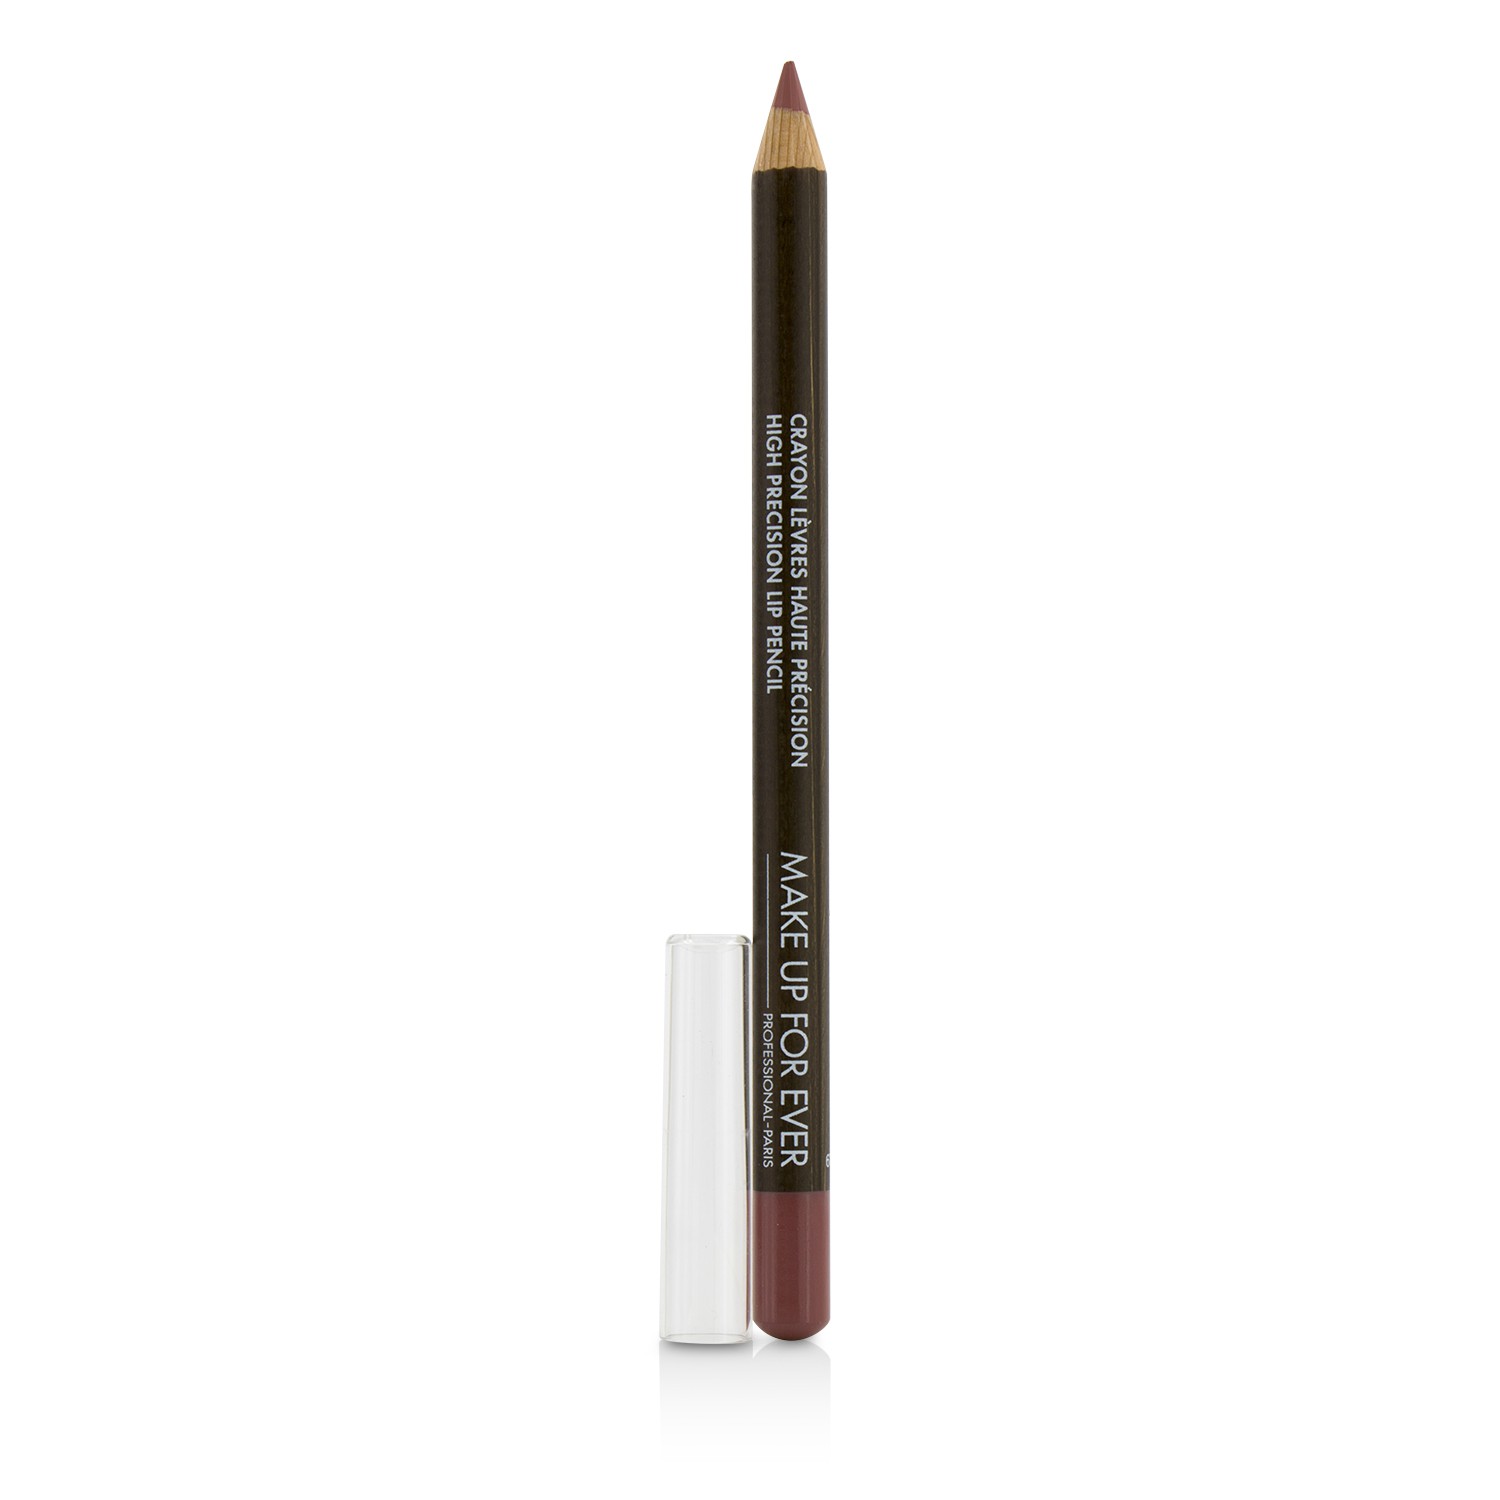 High Precision Lip Pencil - # 11 (Natural Beige) Make Up For Ever Image